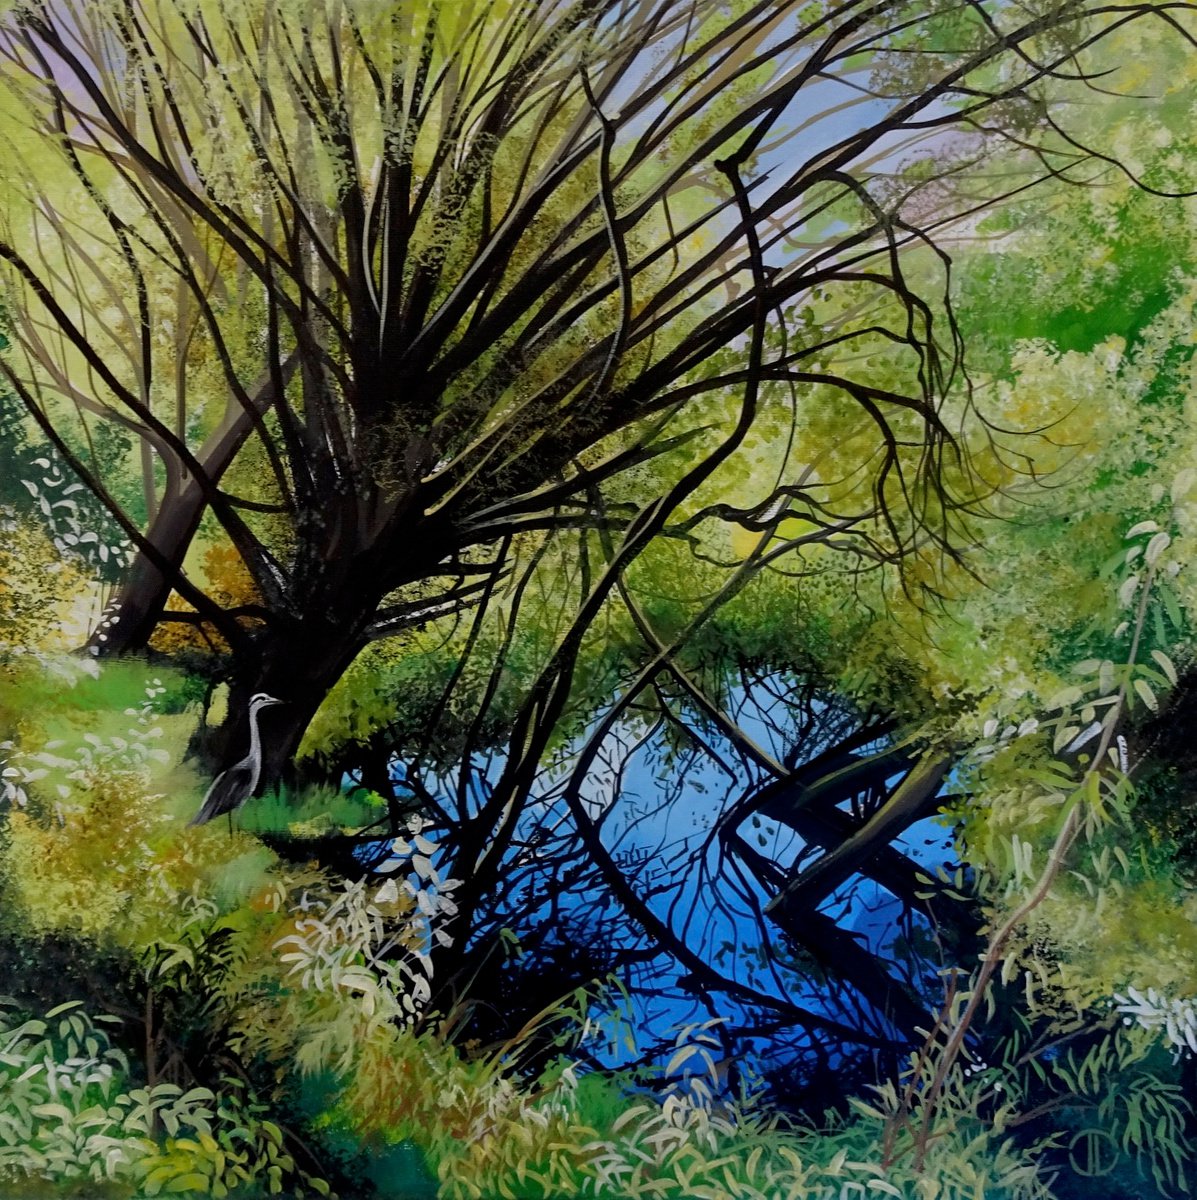 Reflections In The Willow Pool by Joseph Lynch